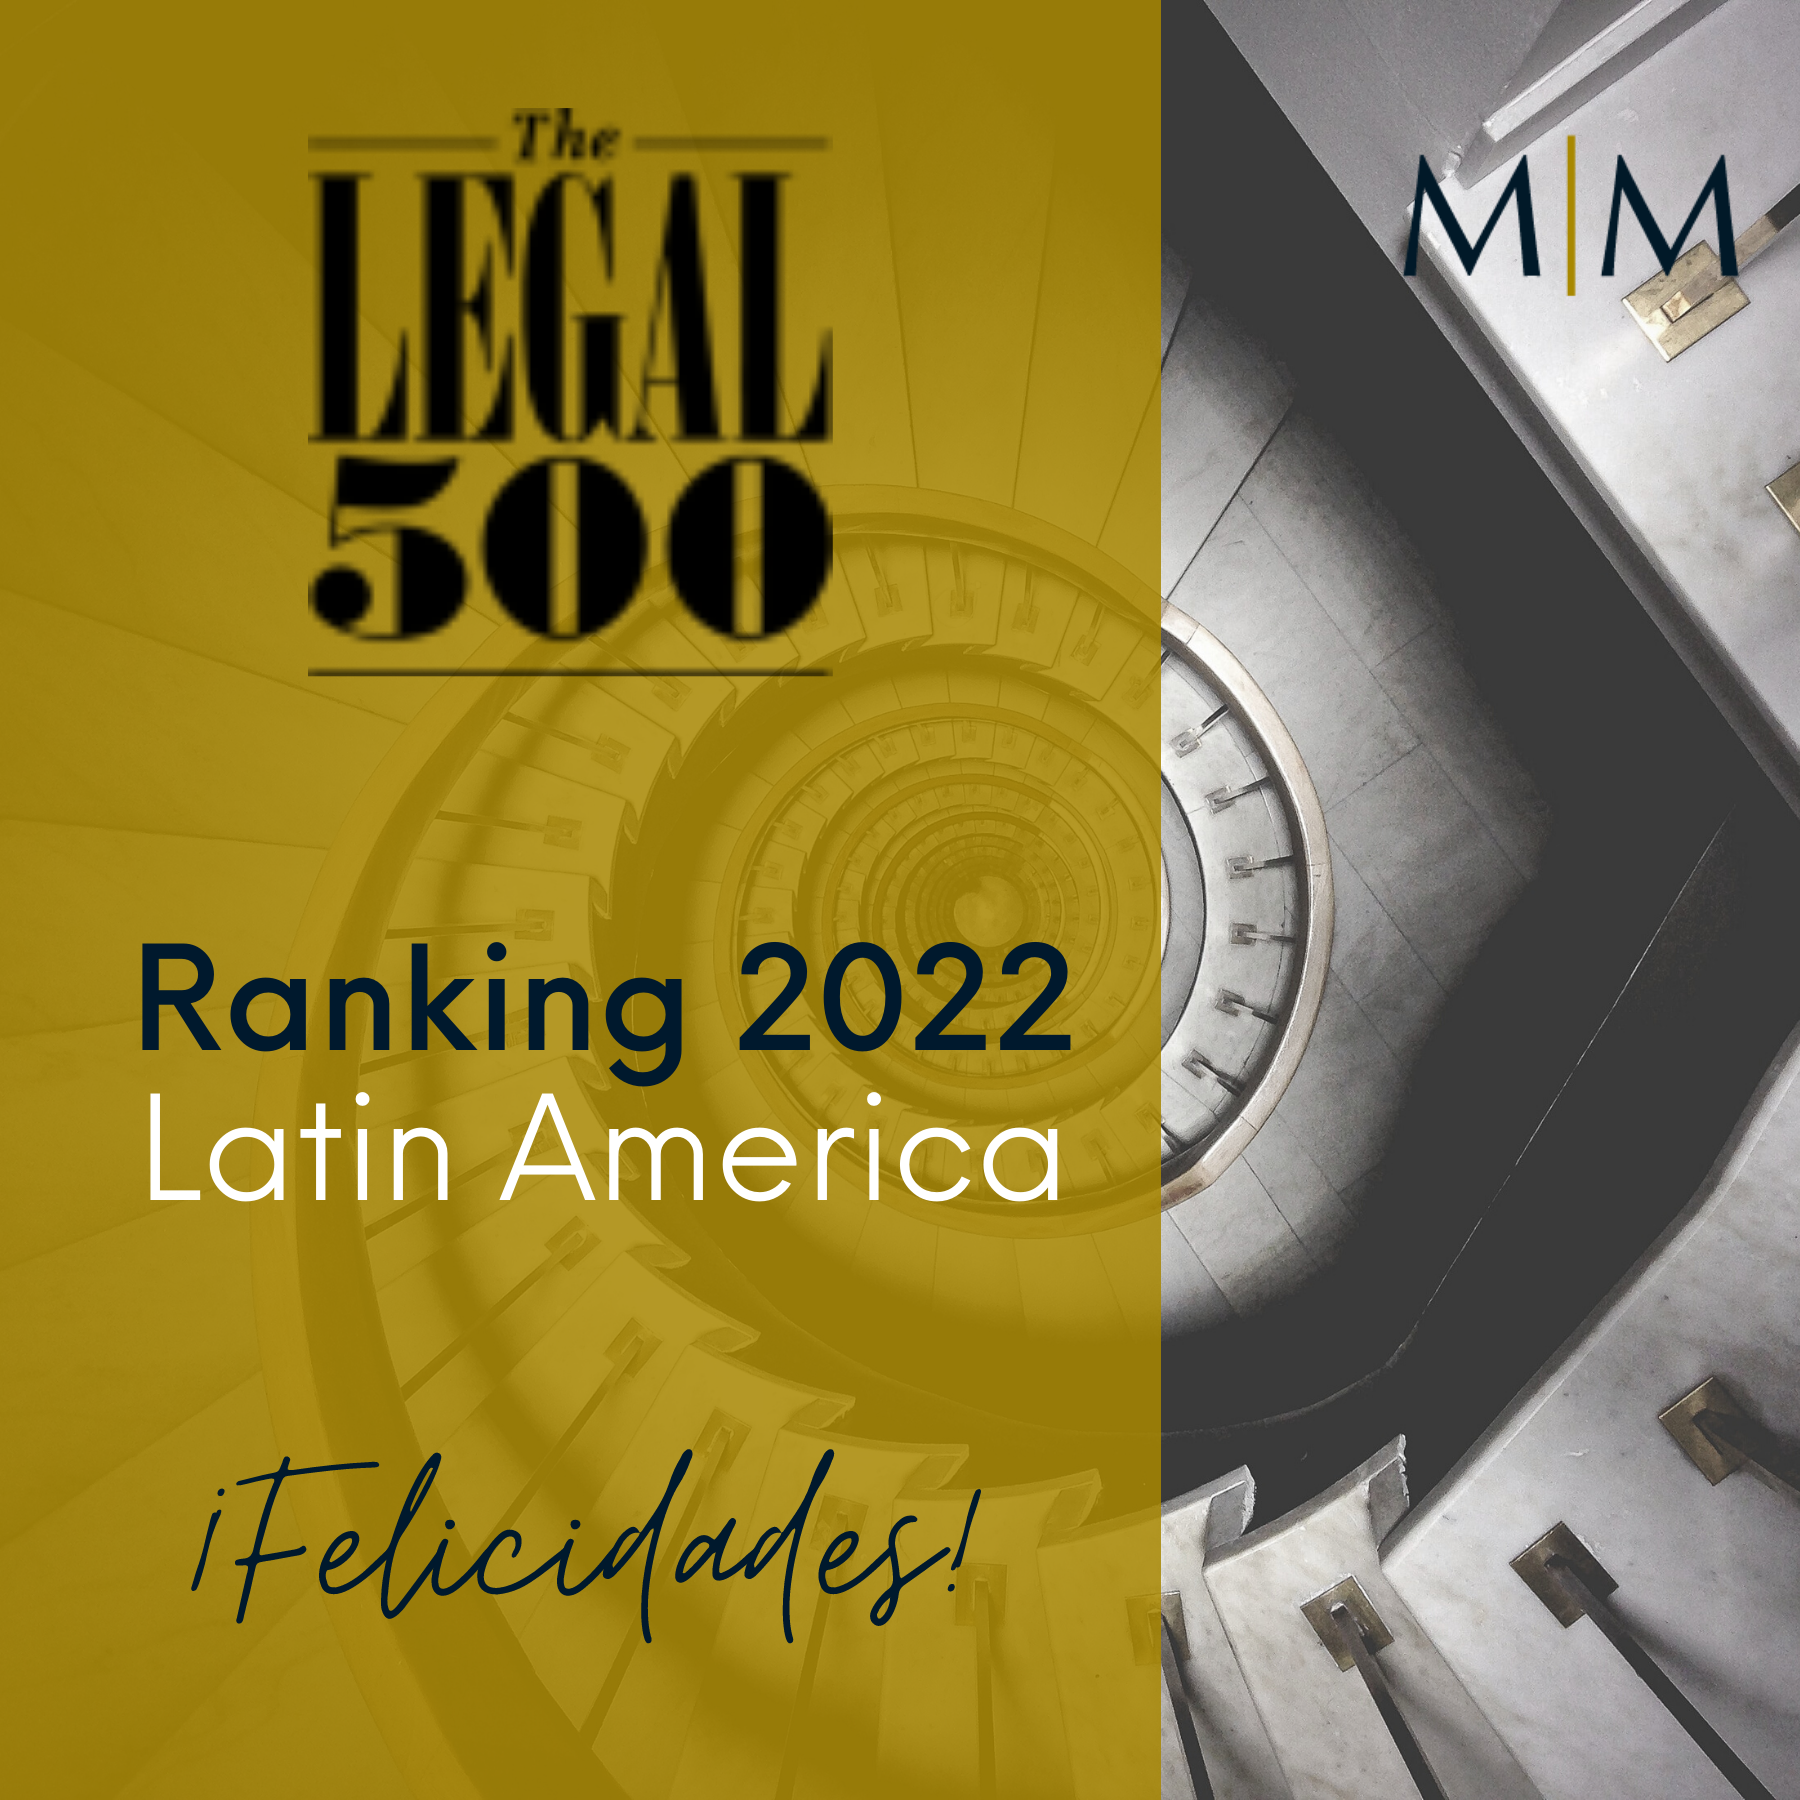 You are currently viewing M&M Reconocimiento- The Legal 500.